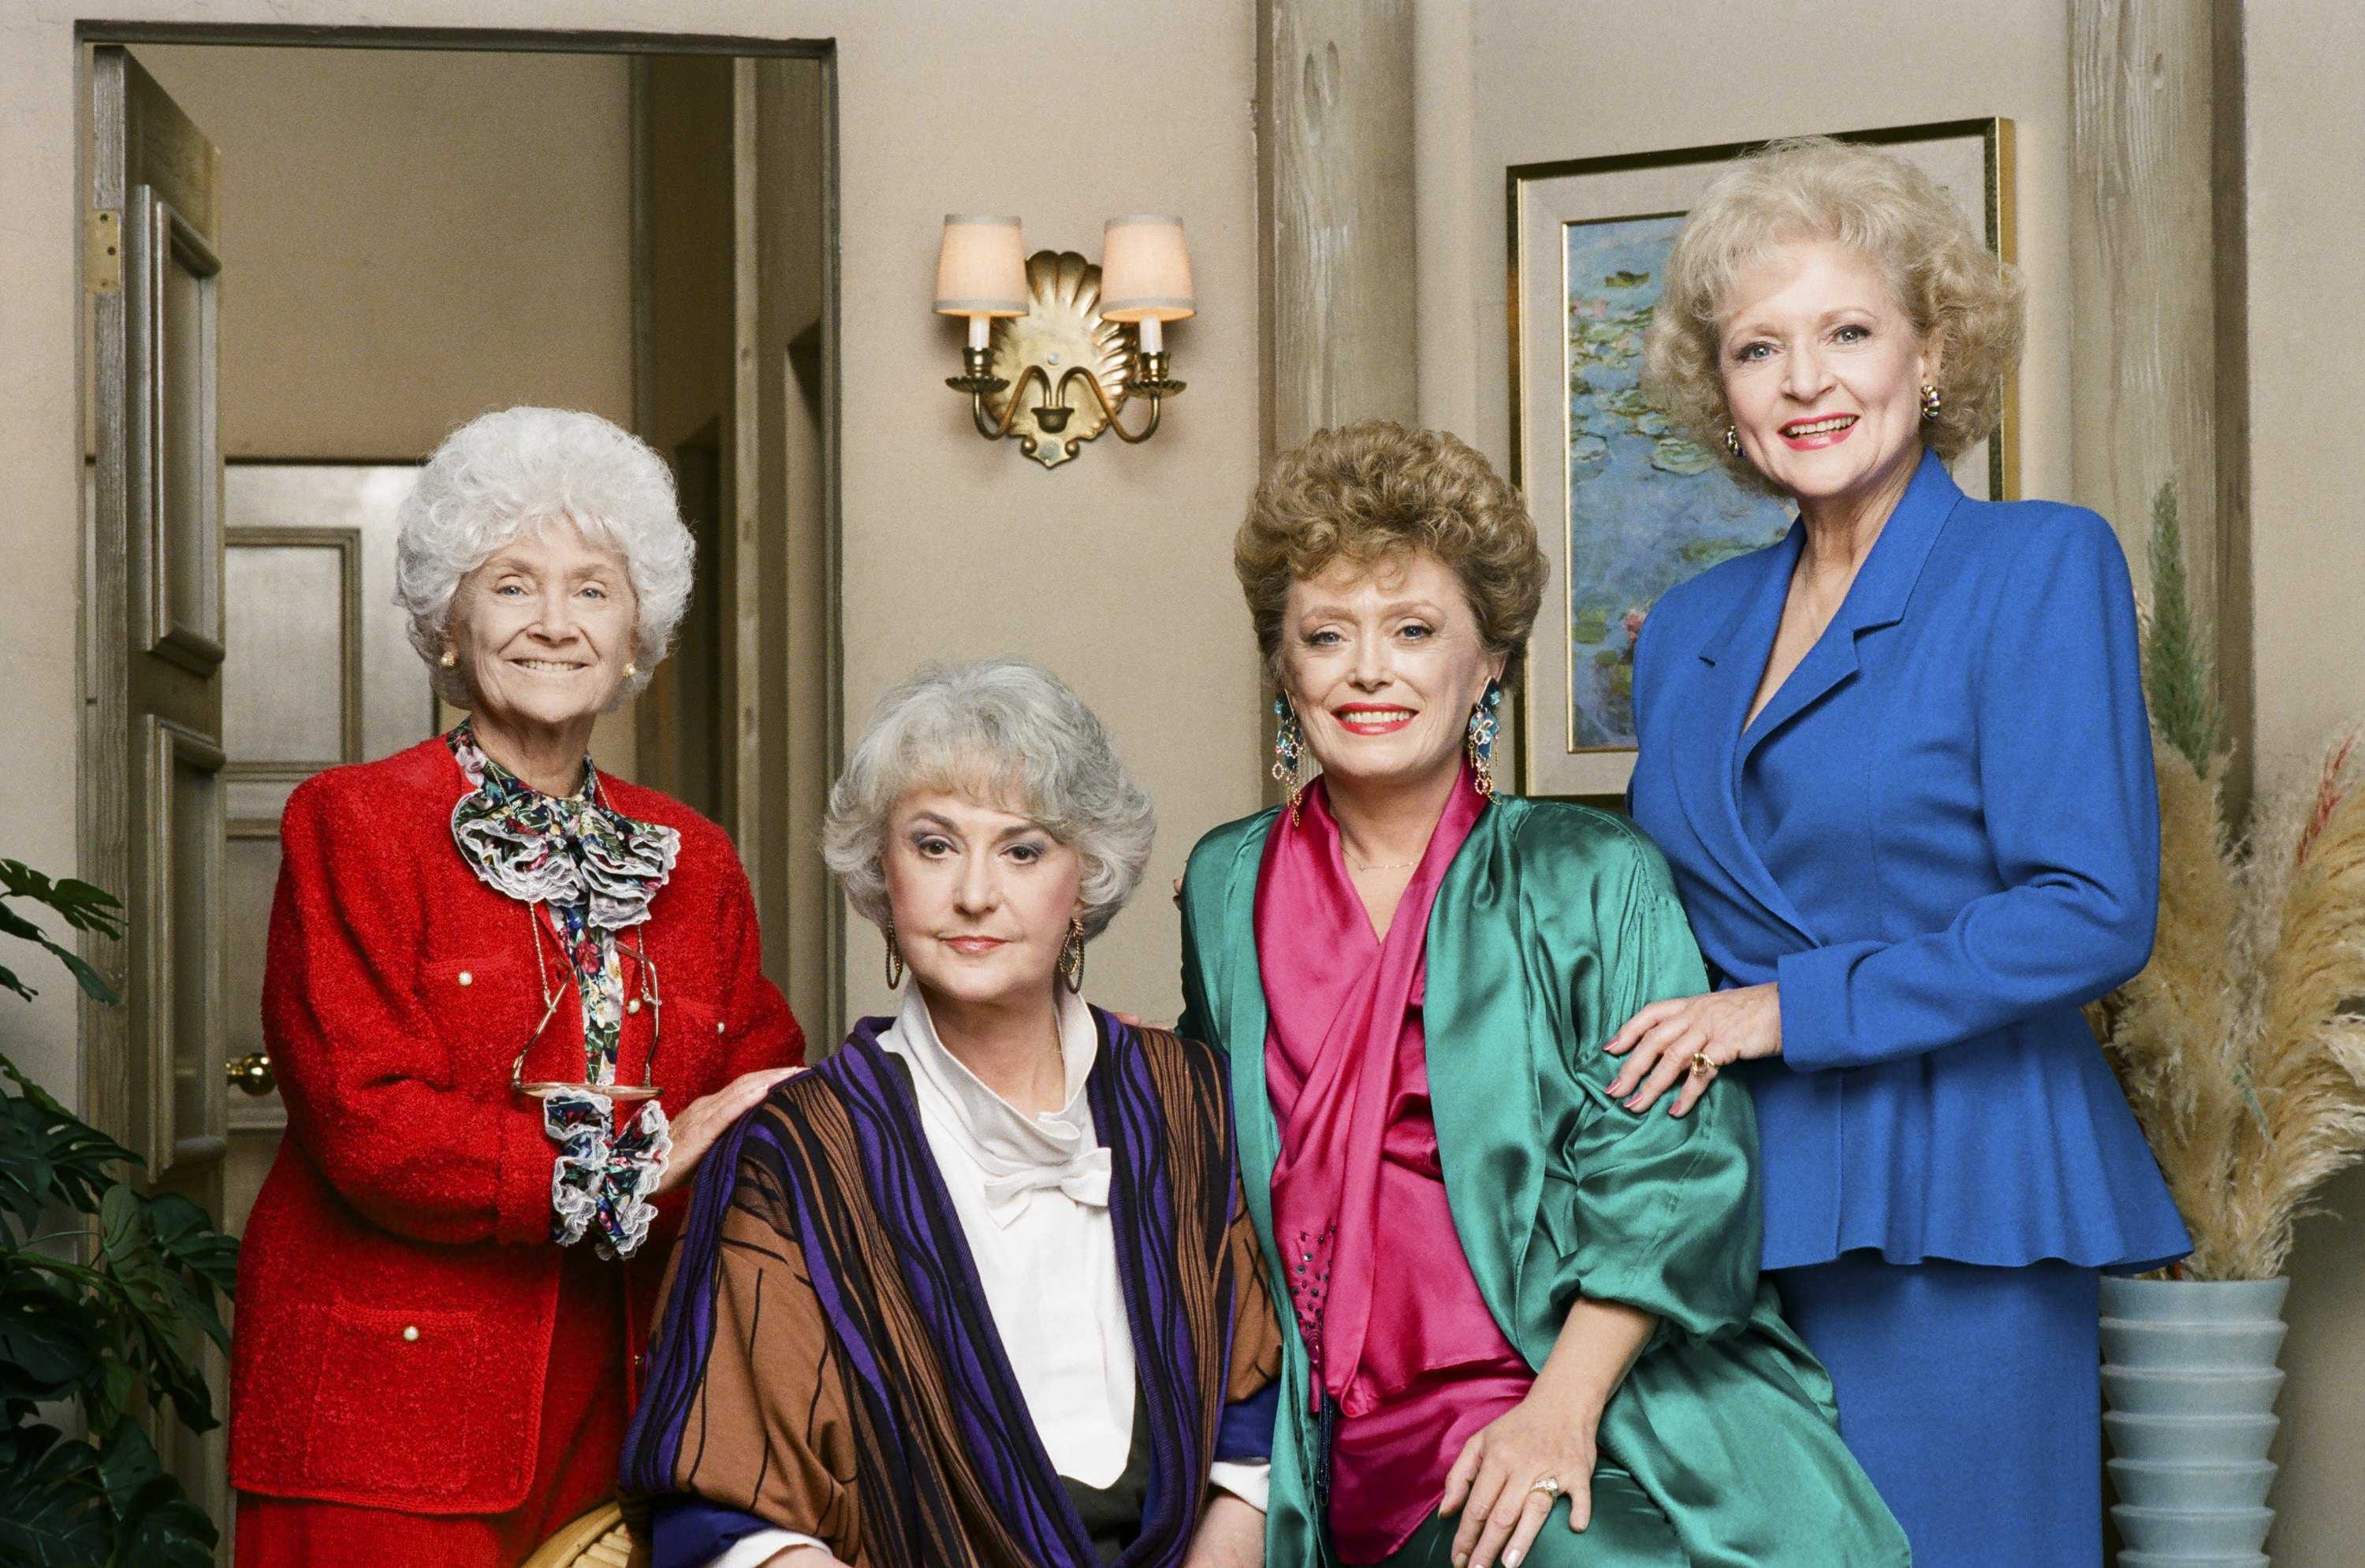 A 'Golden Girls'-themed 'Clue' game is coming